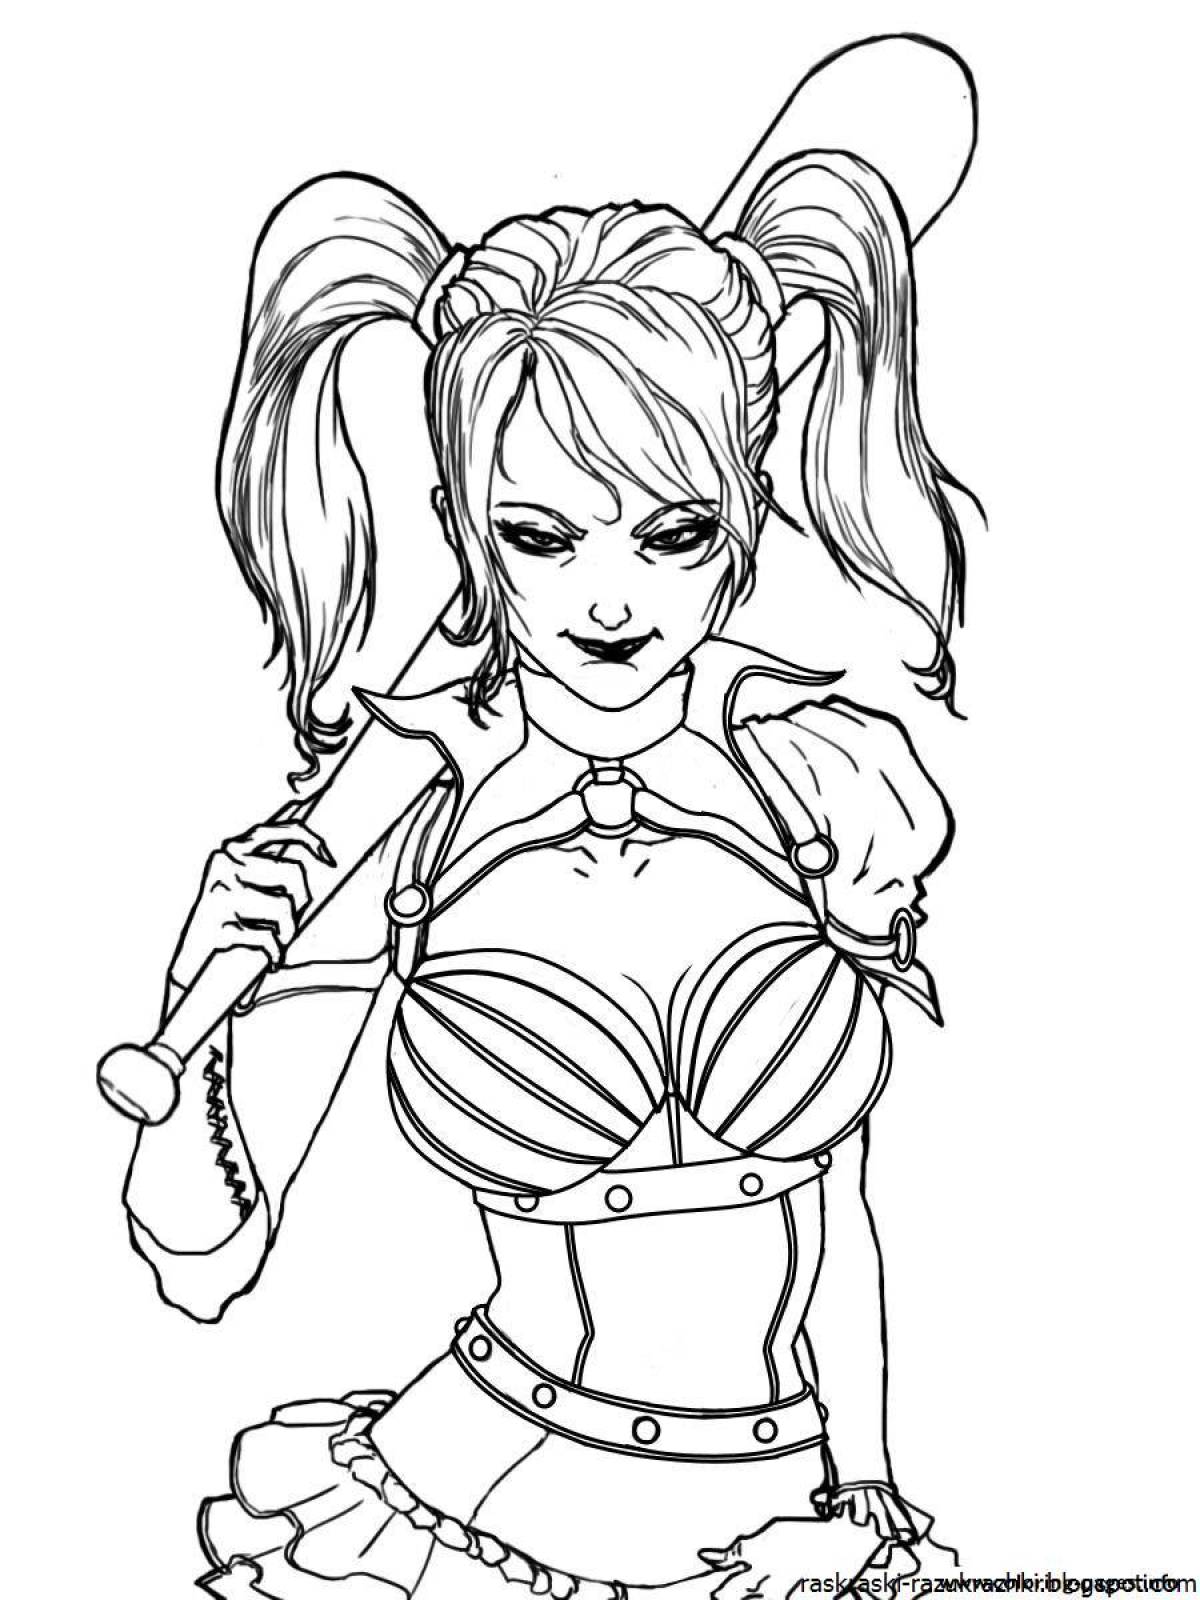 Vibrant harley quinn coloring page